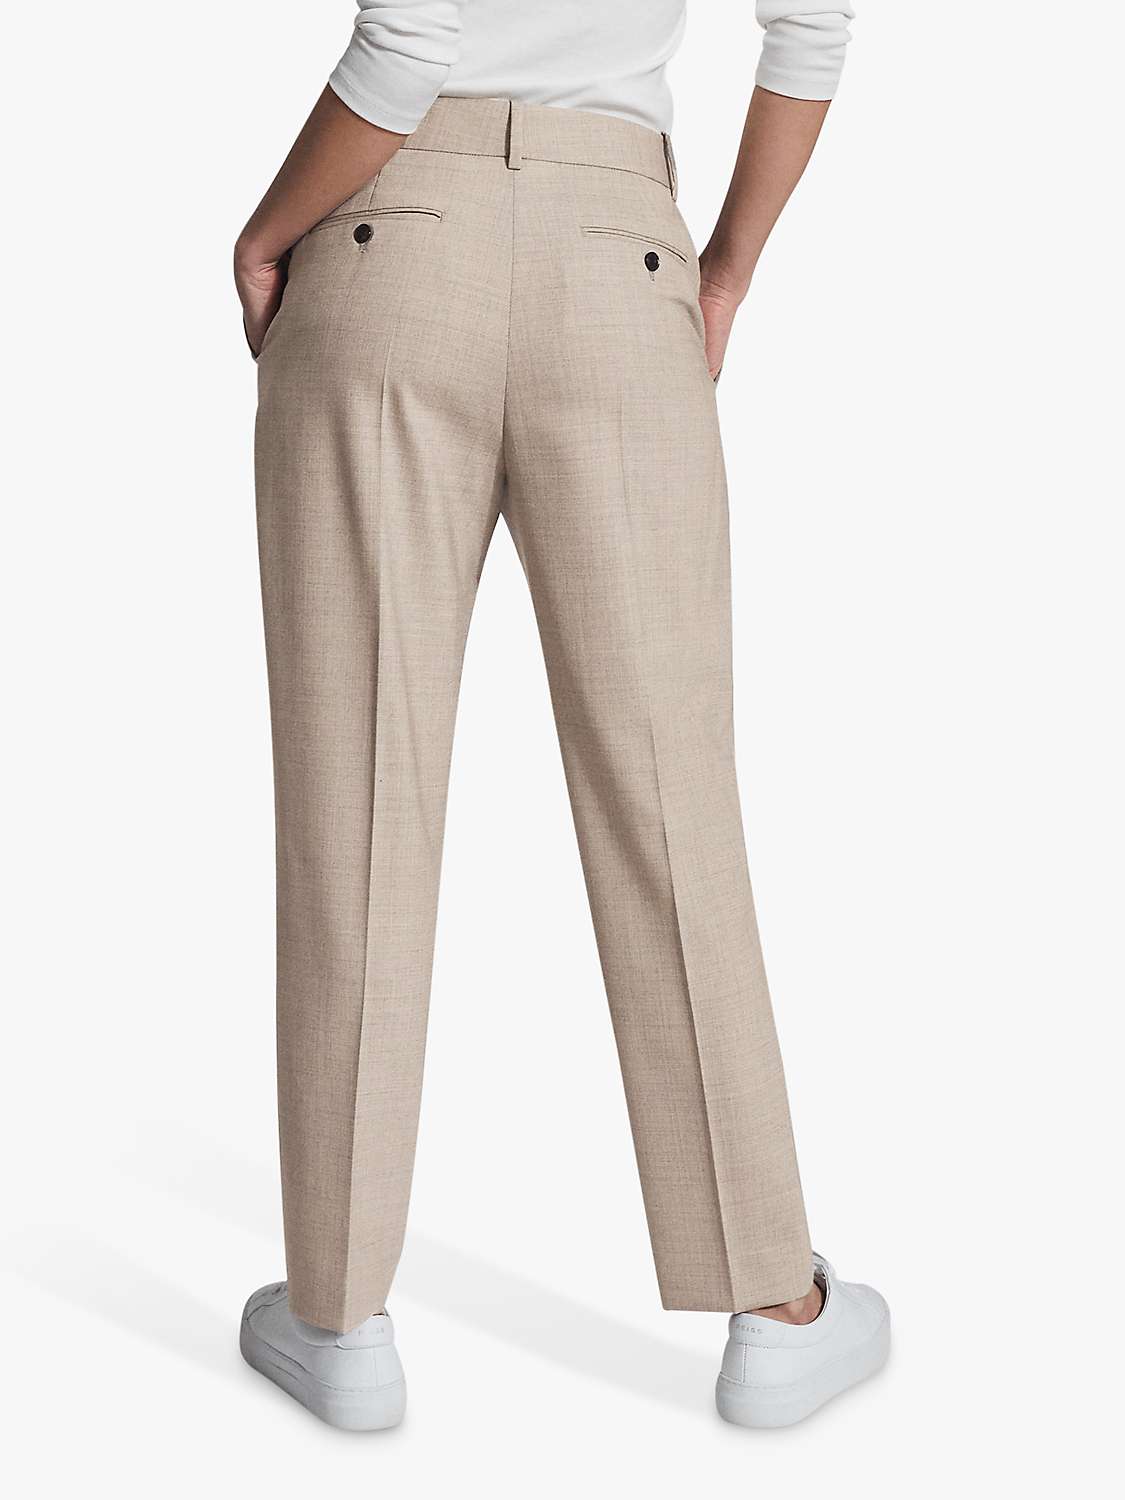 Reiss Emily Wool Blend Tailored Trousers, Oatmeal at John Lewis & Partners